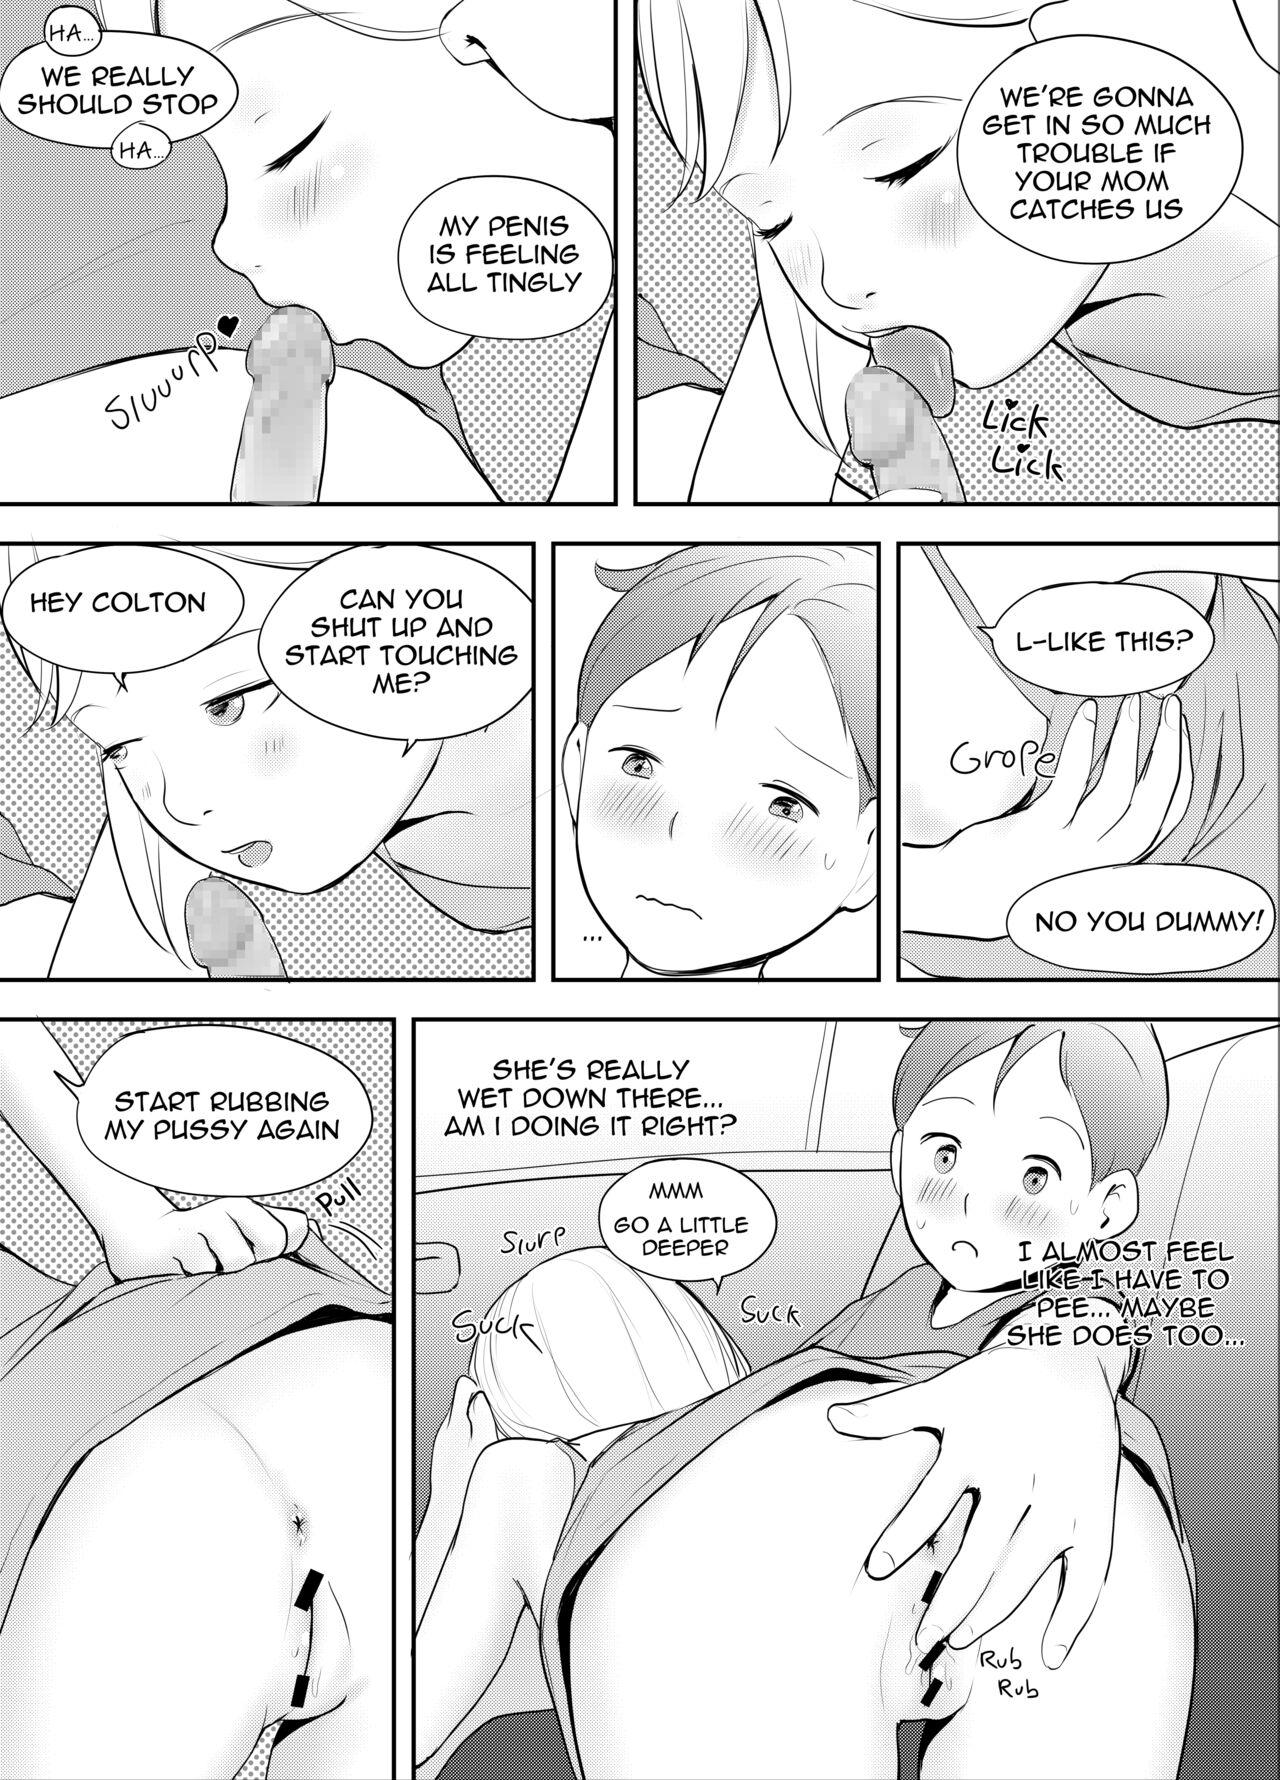 Blowjob Passing the Time - Original Fucking - Page 10